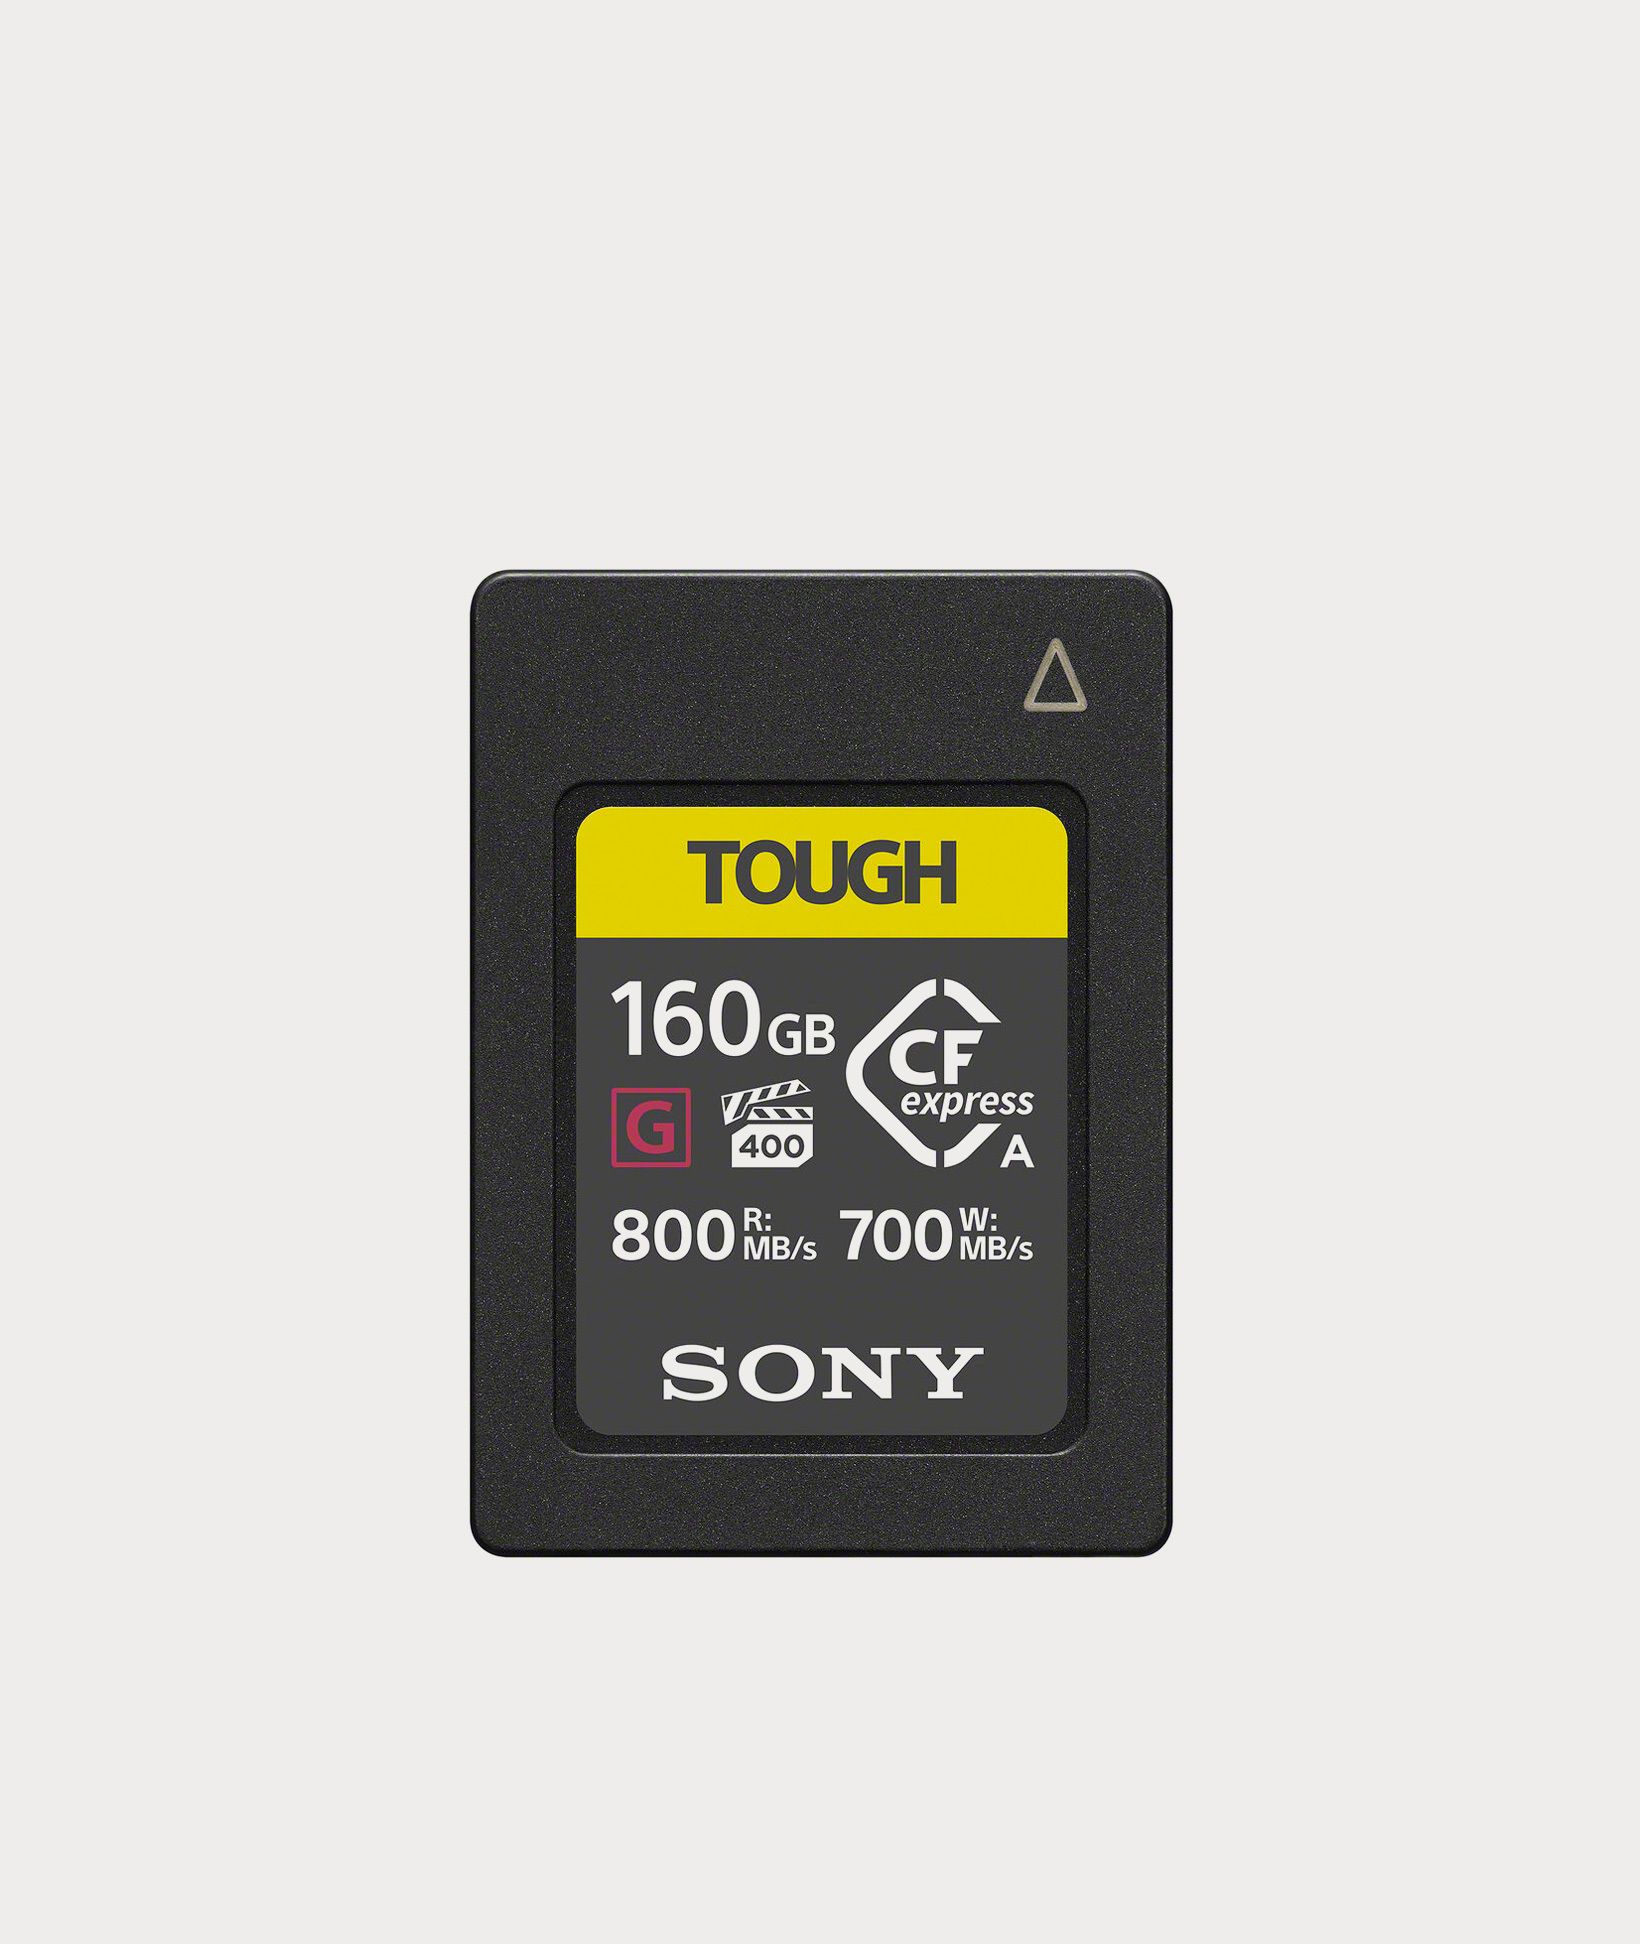 Sony CFexpress Type A Memory Card - 160GB | Moment